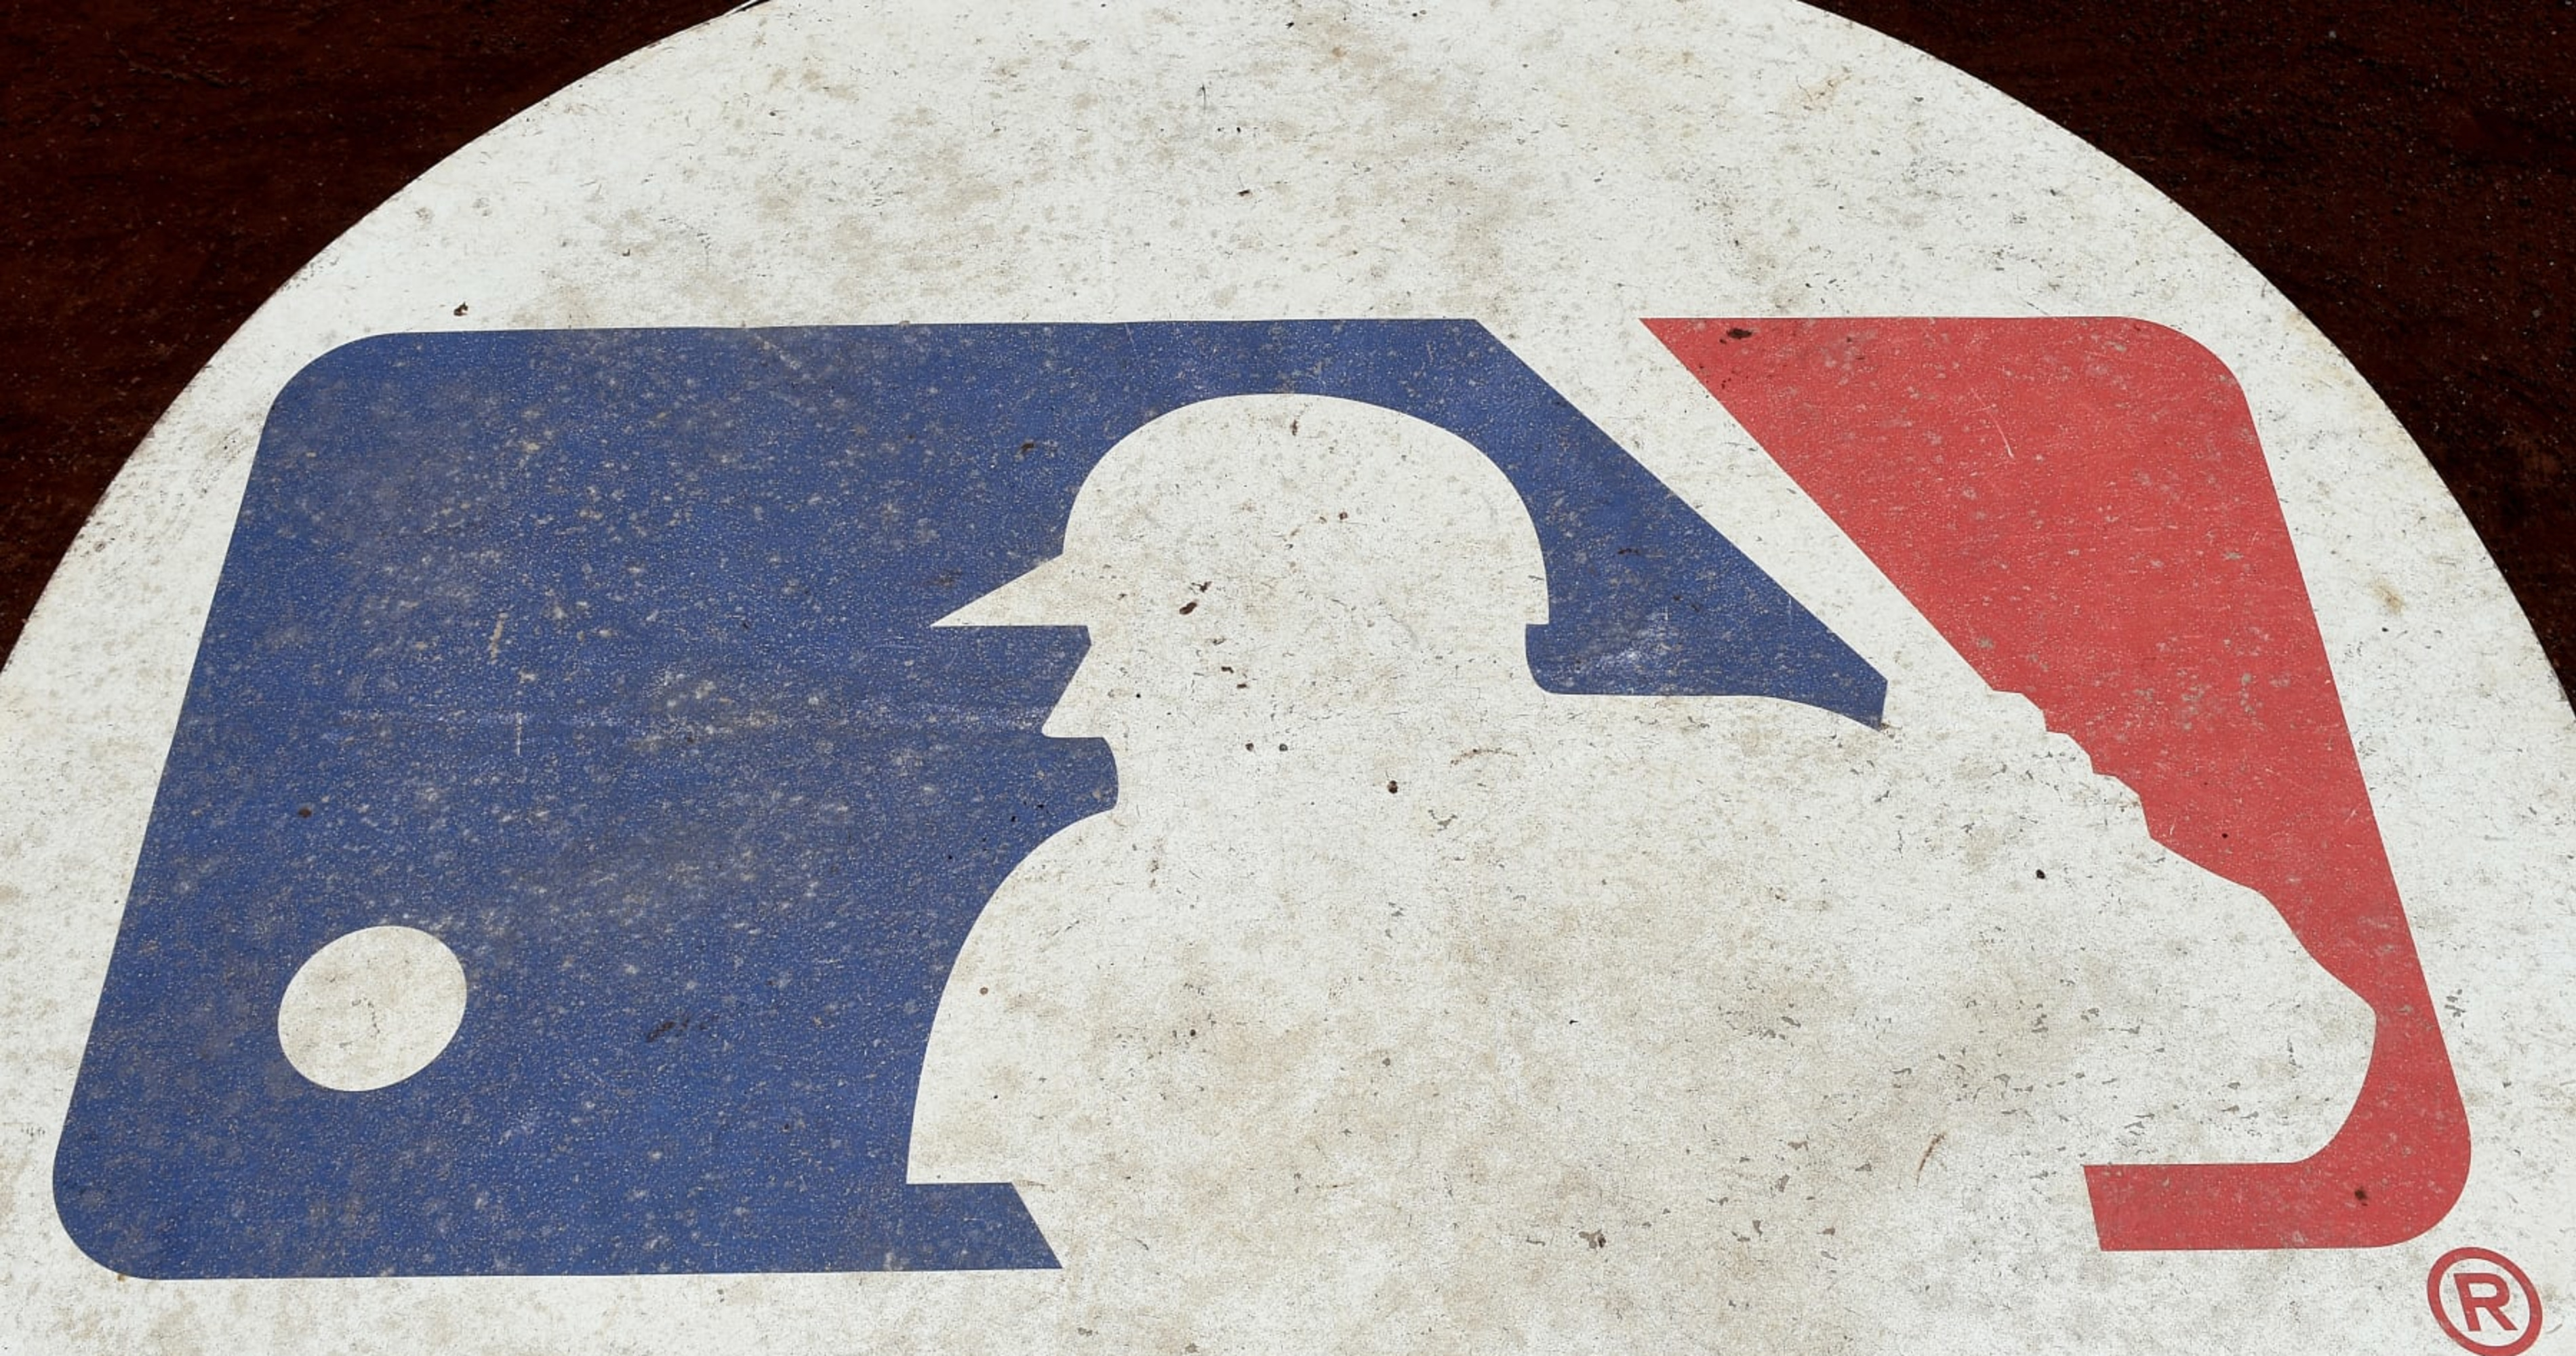 Average Salaries for MLB Players Increase in 2022